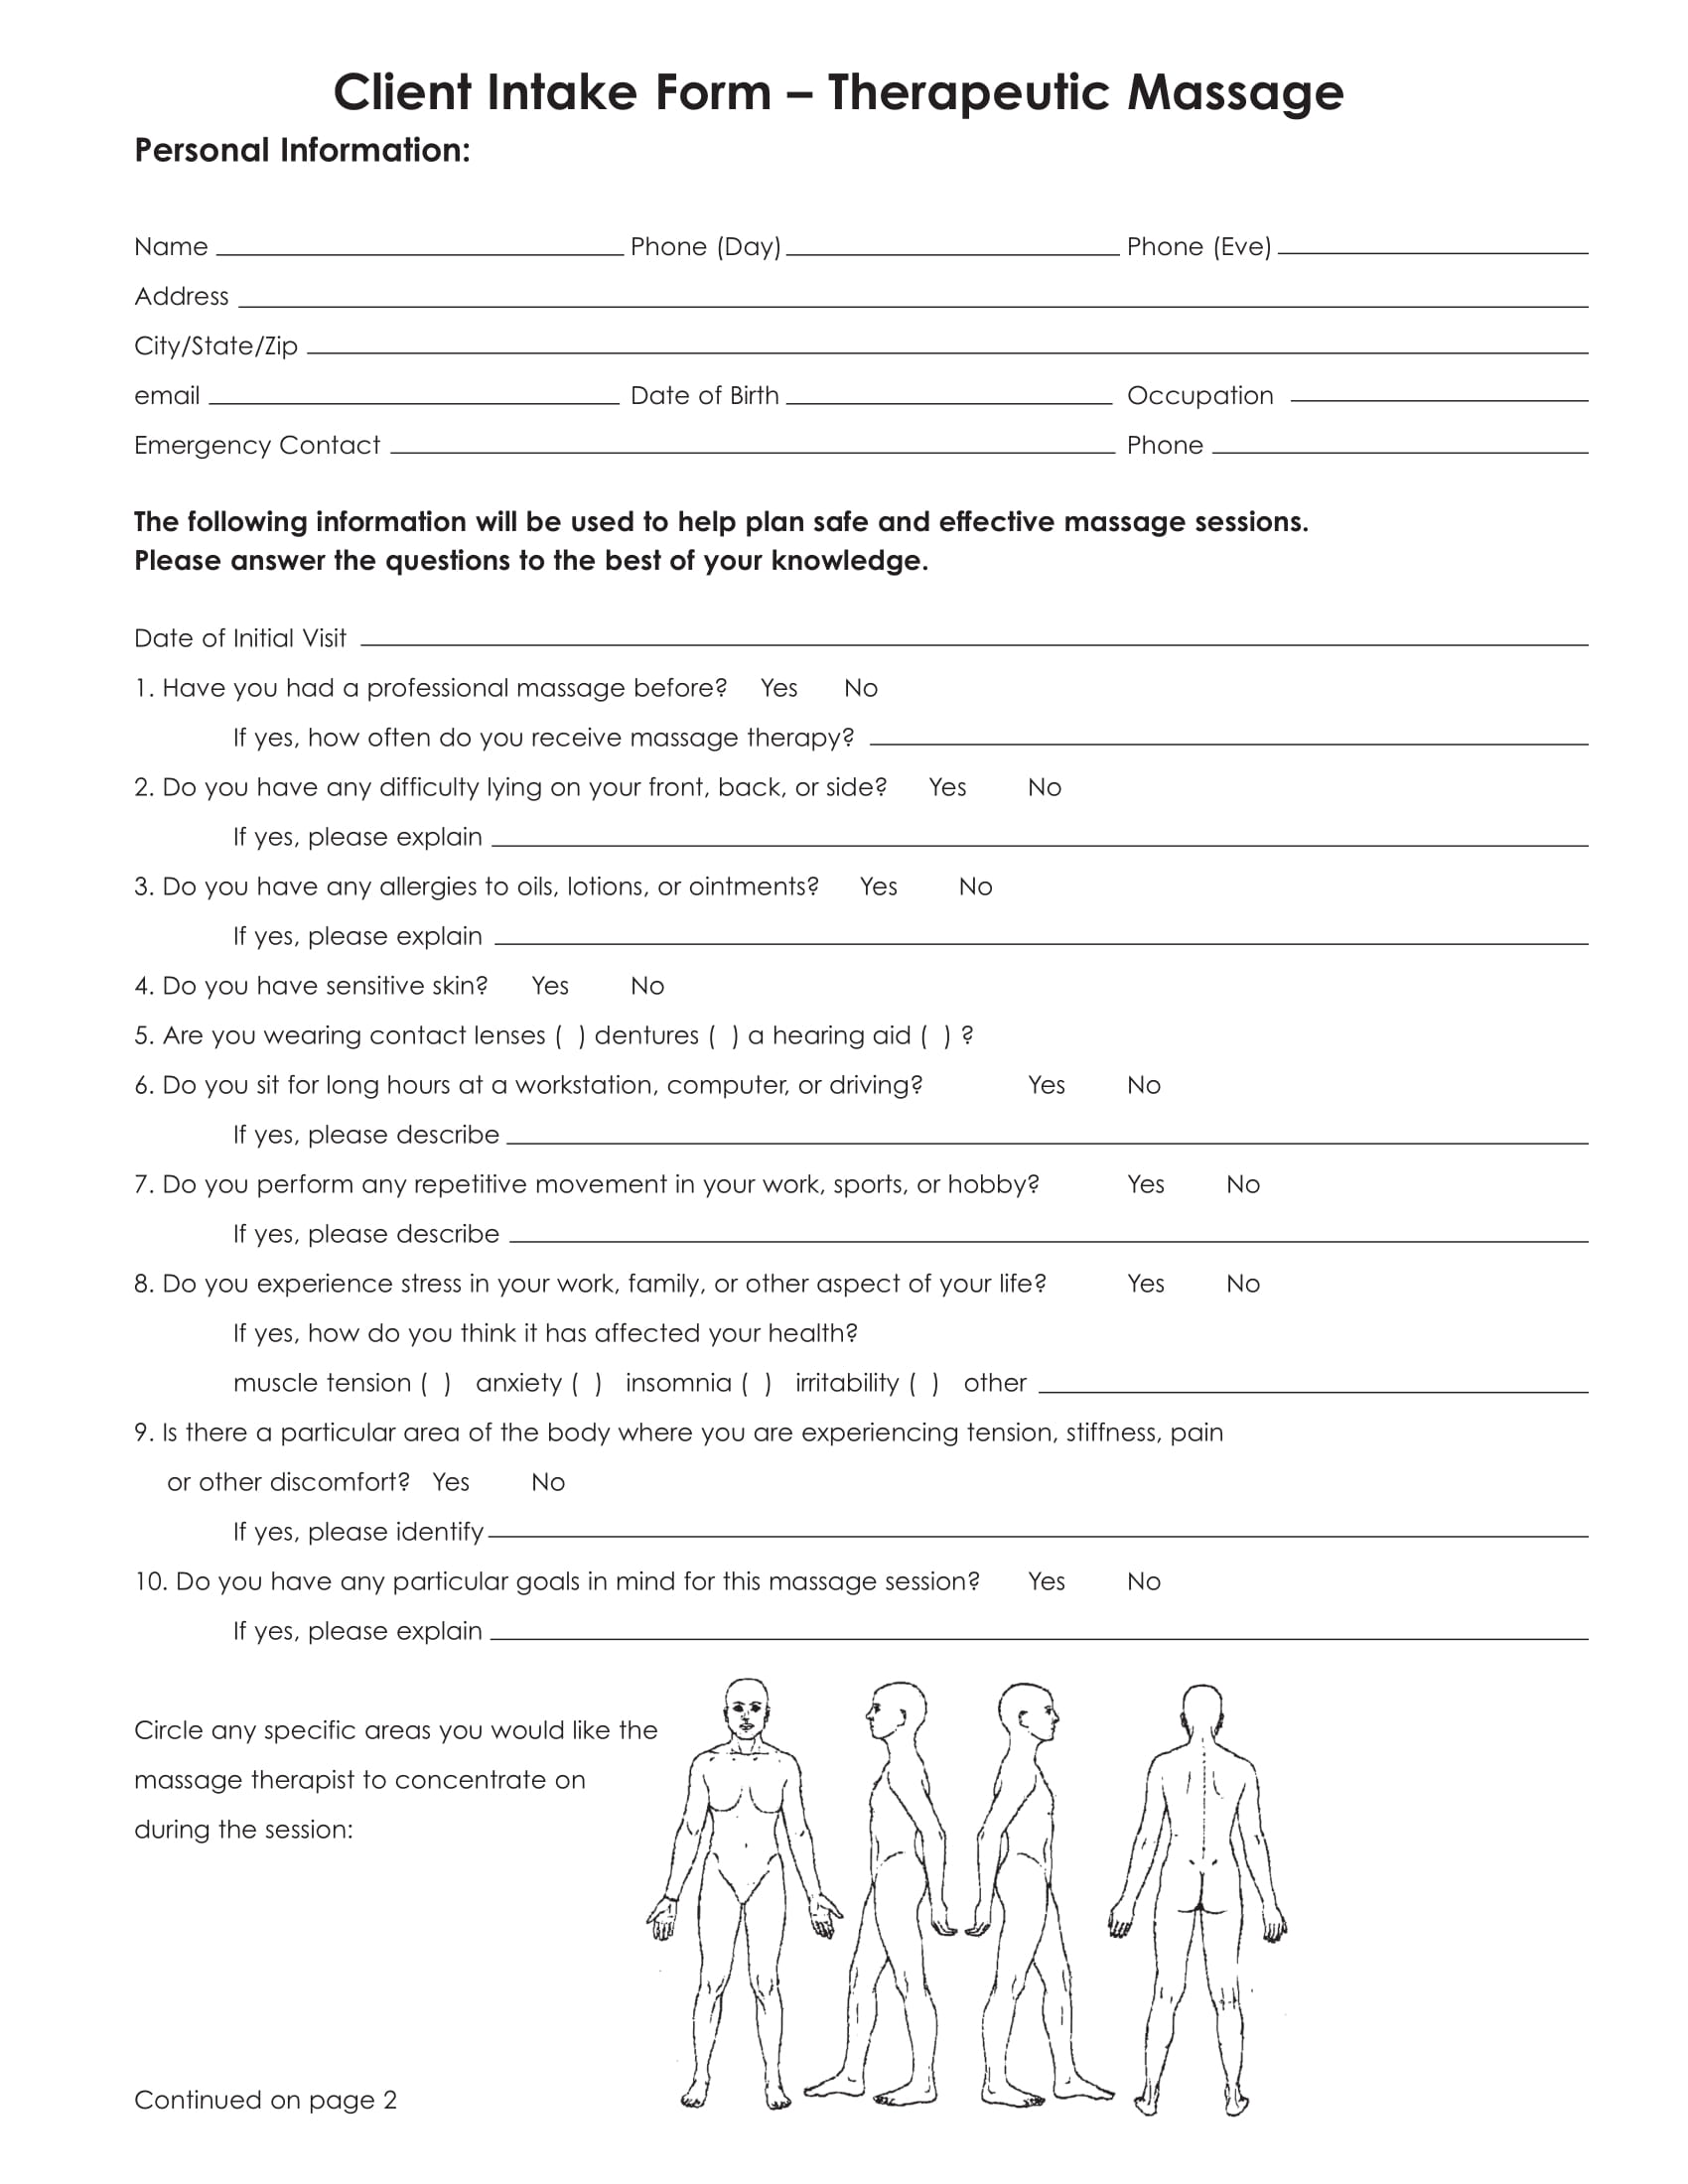 therapeutic massage client intake form 1